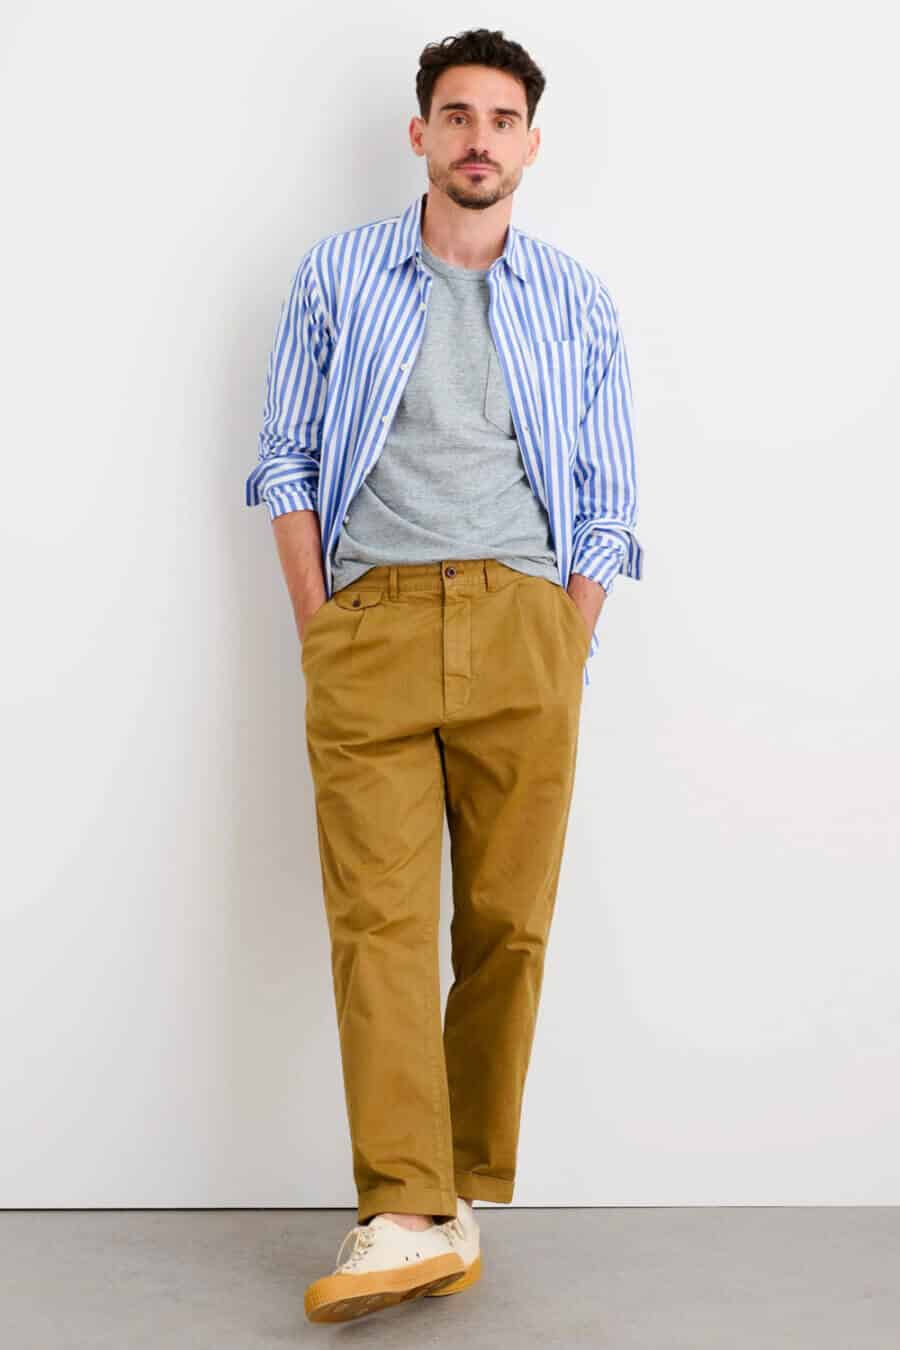 Men's wide khaki pants worn with a striped shirt and grey tee outfit